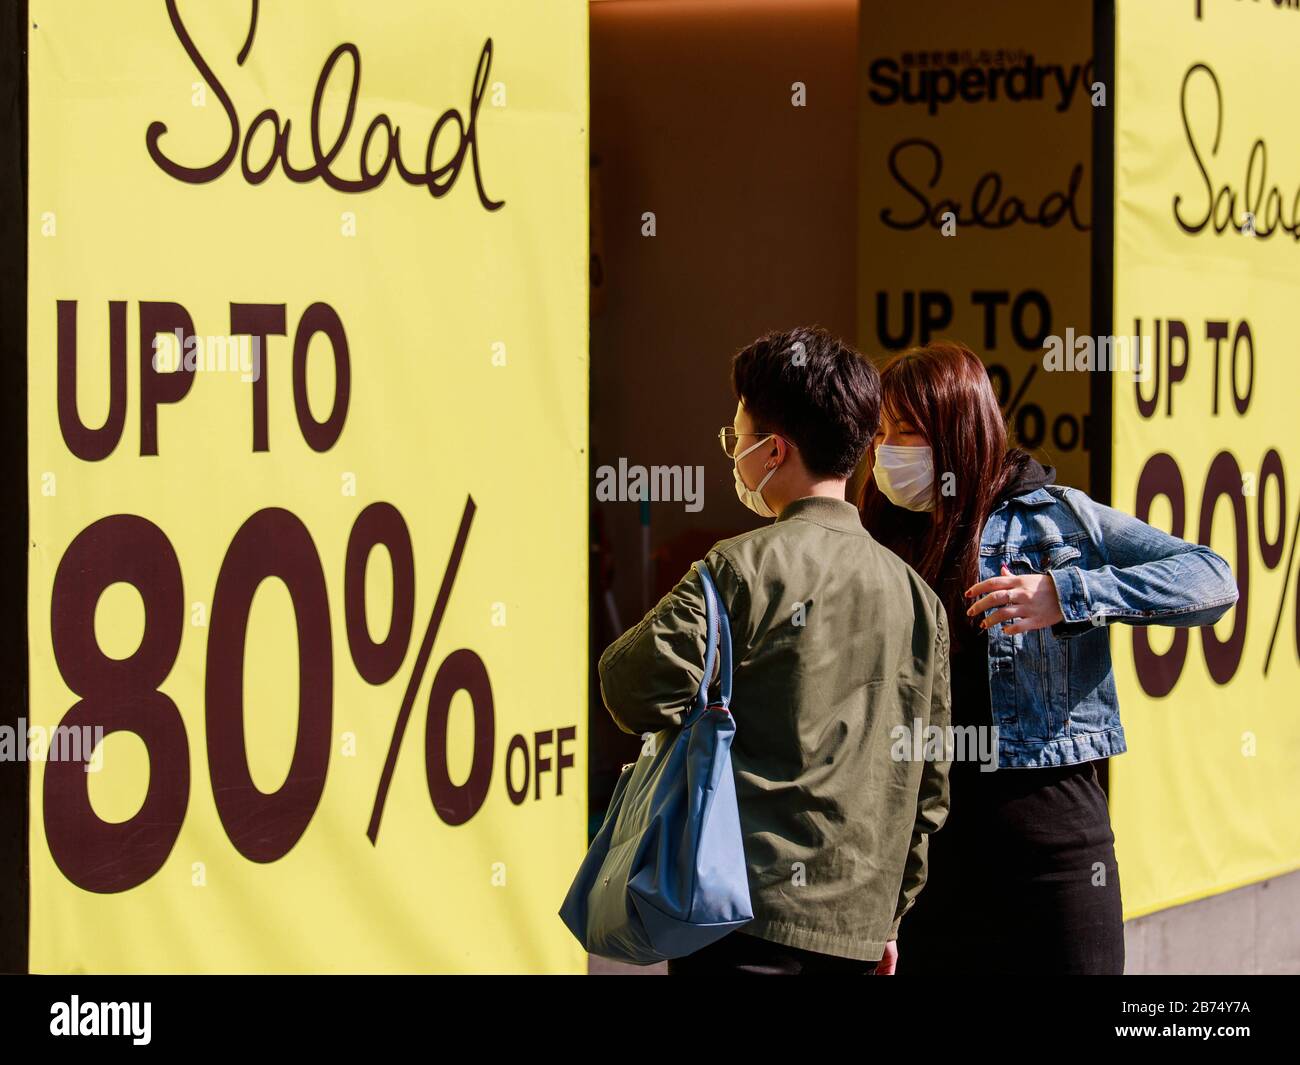 People walk in front of a shop which shows 80% off in Tsim Sha Tsui of Hong Kong. Stock Photo